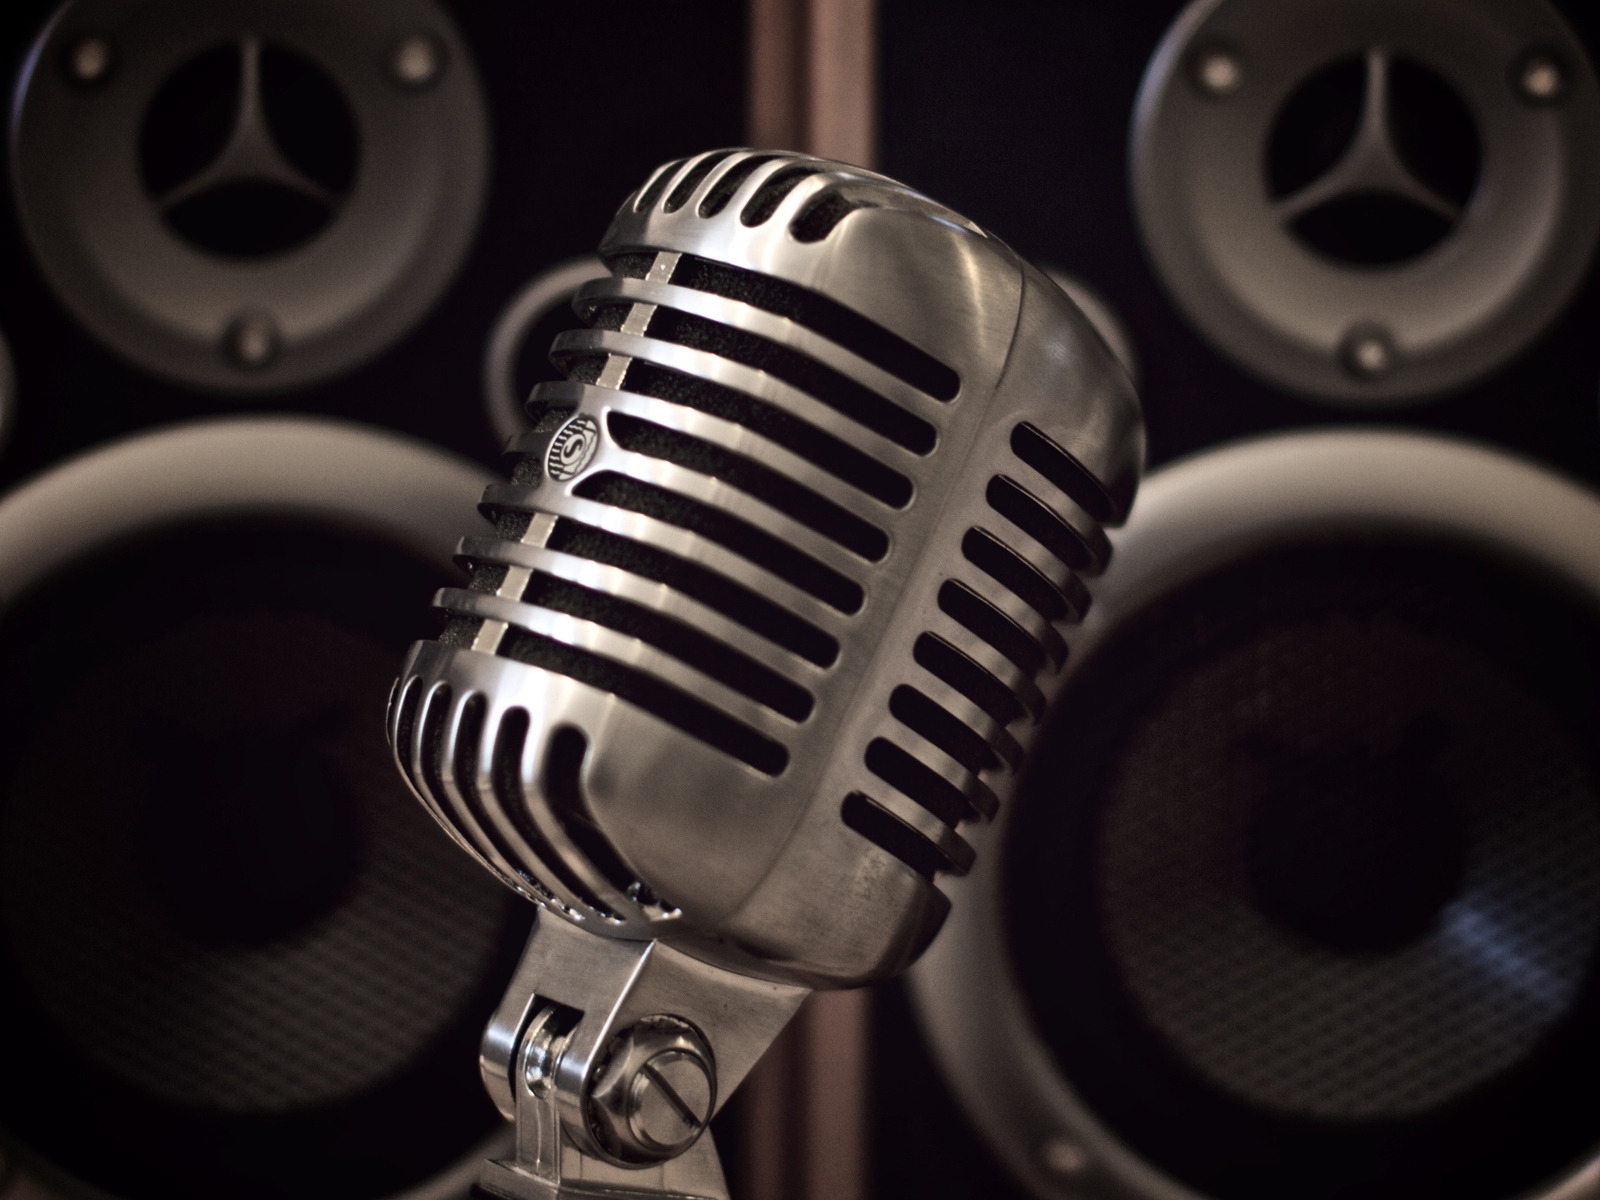 Vintage Microphone for 1600 x 1200 resolution